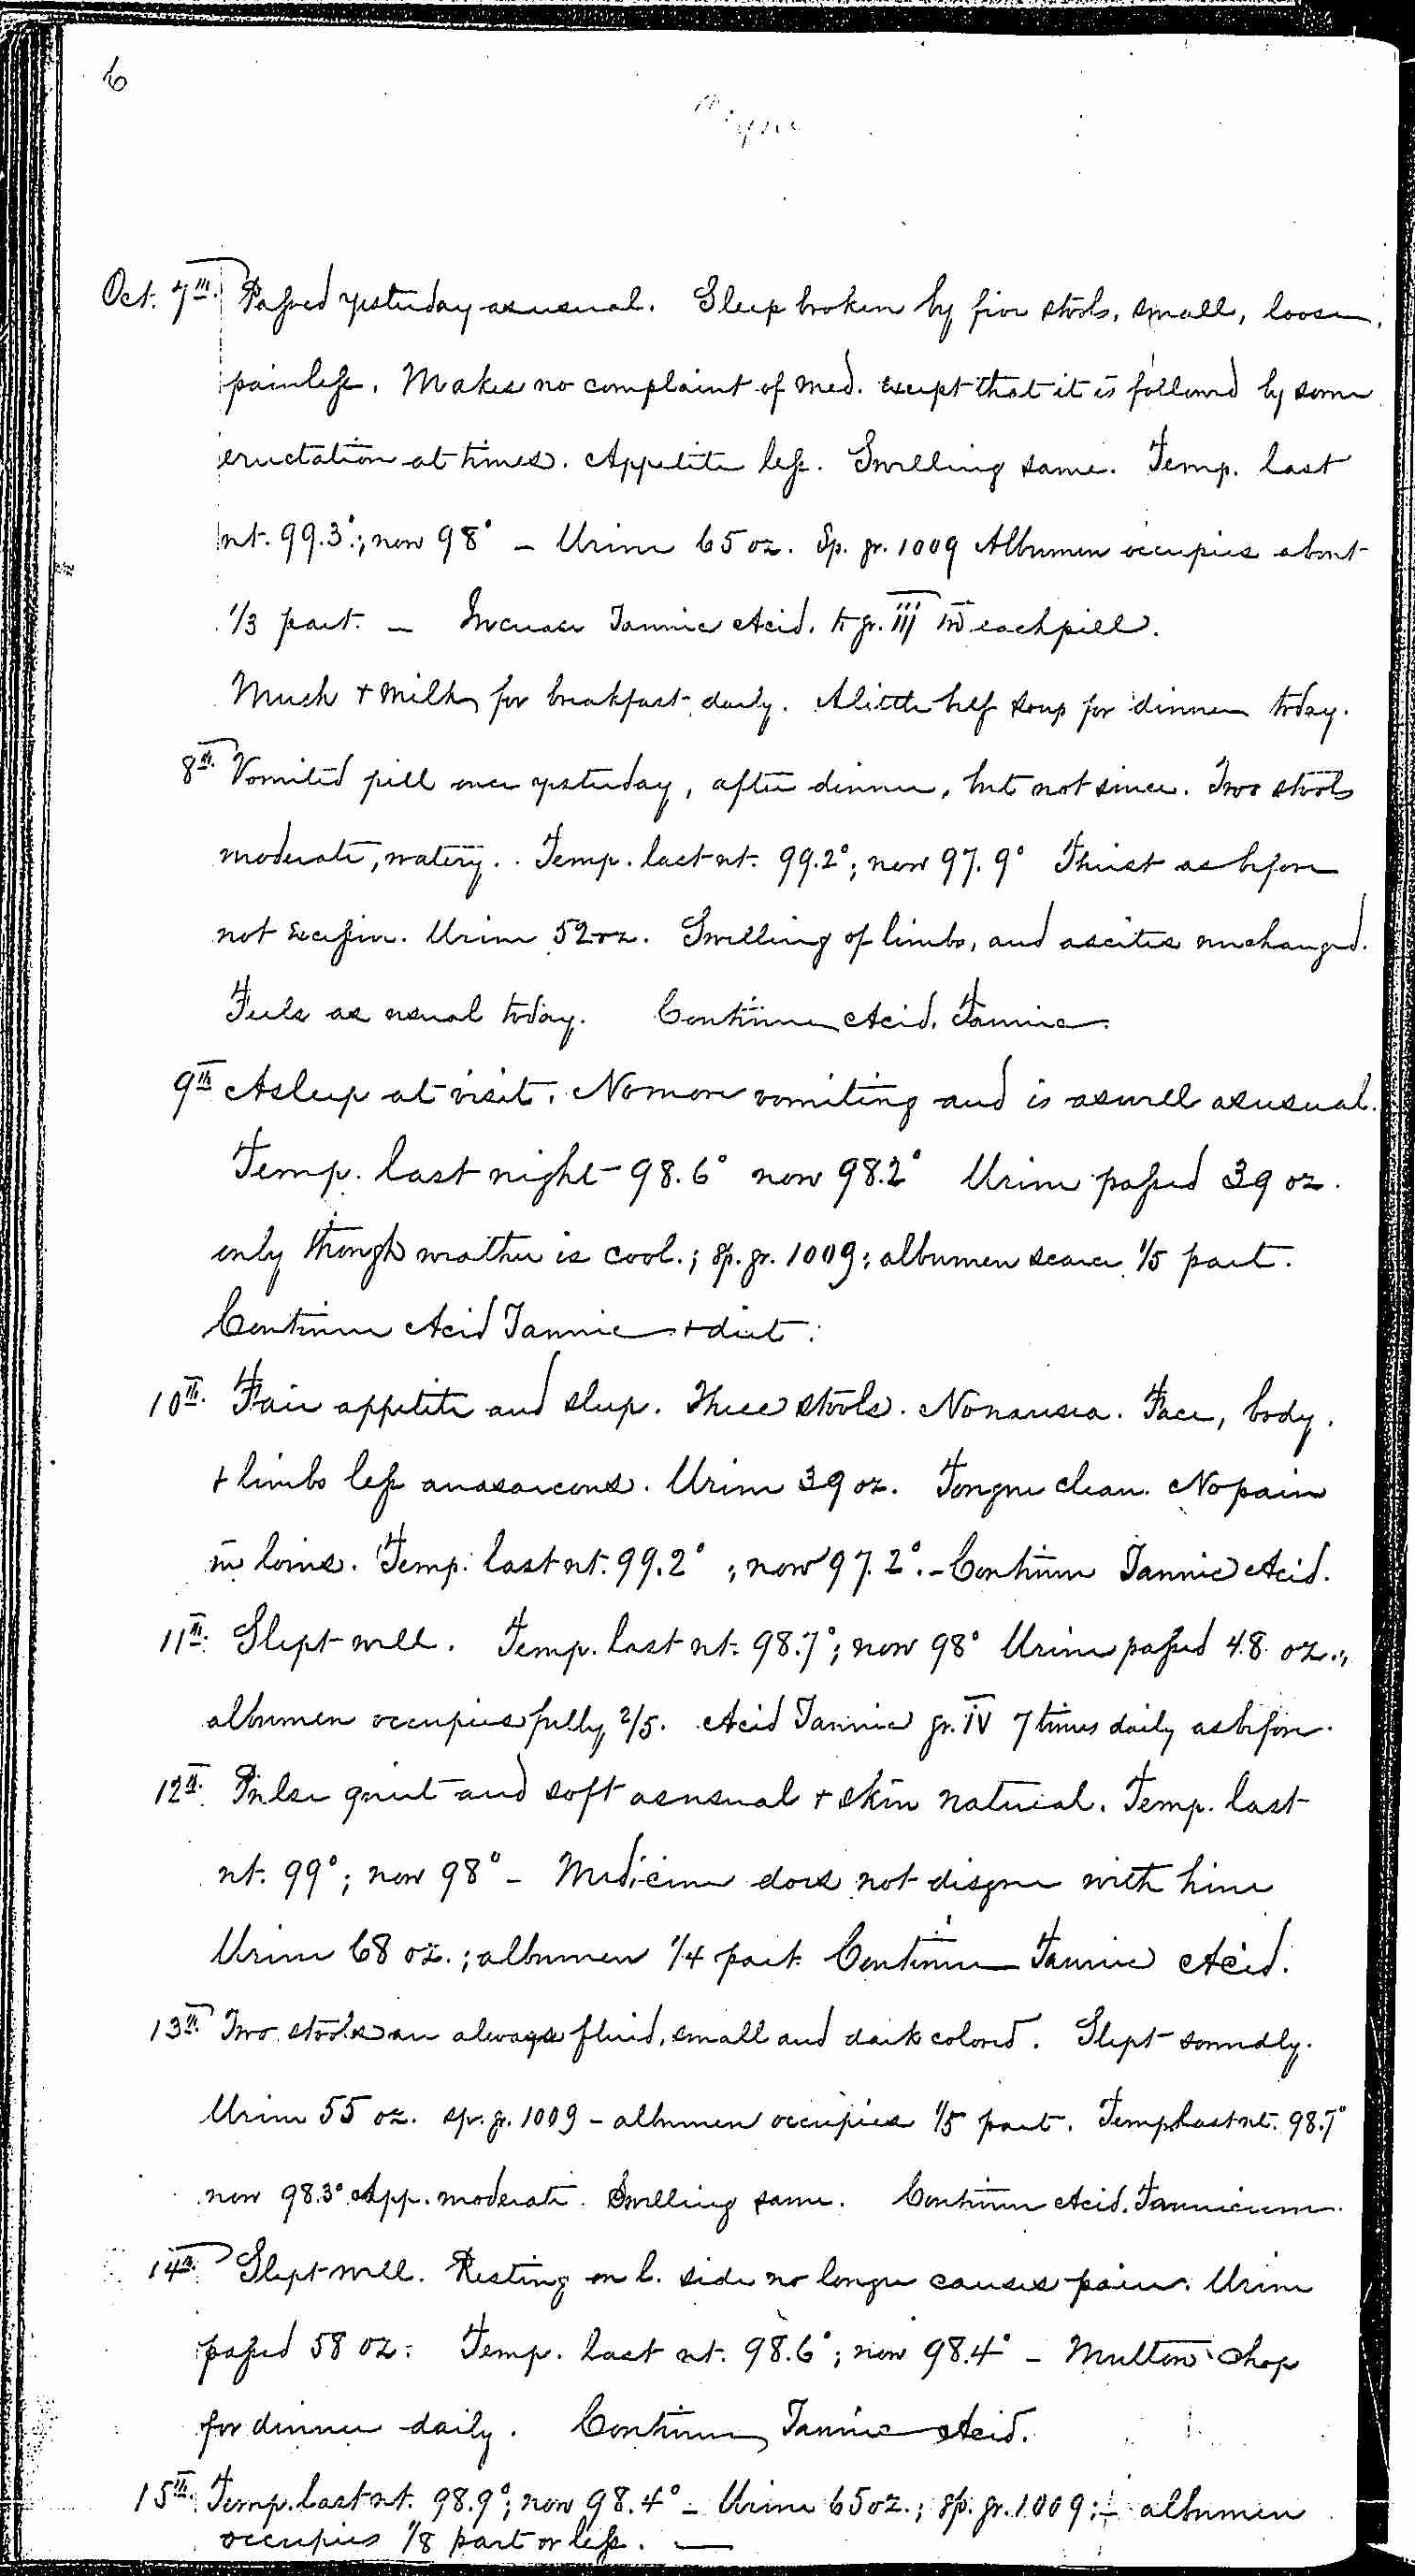 Entry for Bernard Coyne (page 6 of 13) in the log Hospital Tickets and Case Papers - Naval Hospital - Washington, D.C. - 1868-69